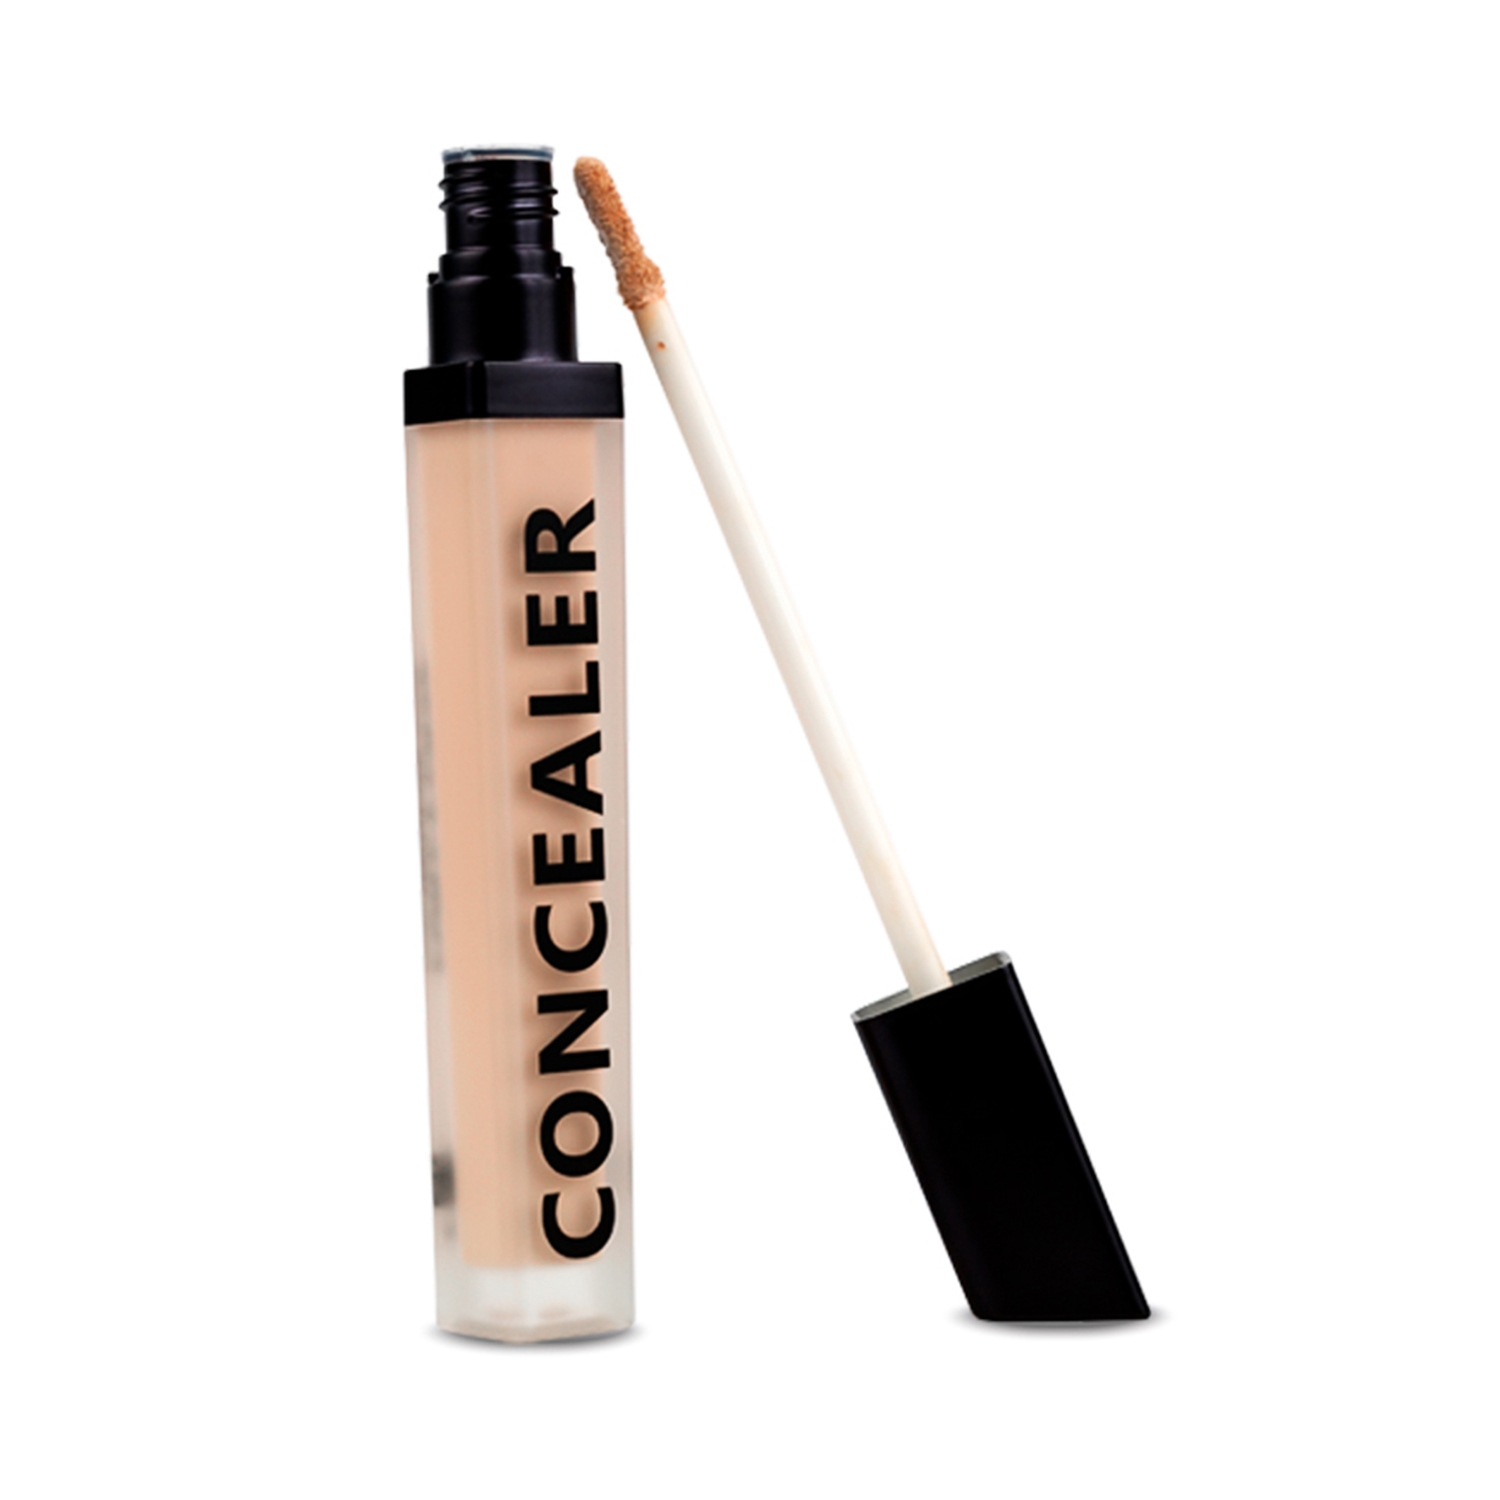 Daily Life Forever52 | Daily Life Forever52 Coverup Concealer CCU20.1 - Buiskit (7ml)